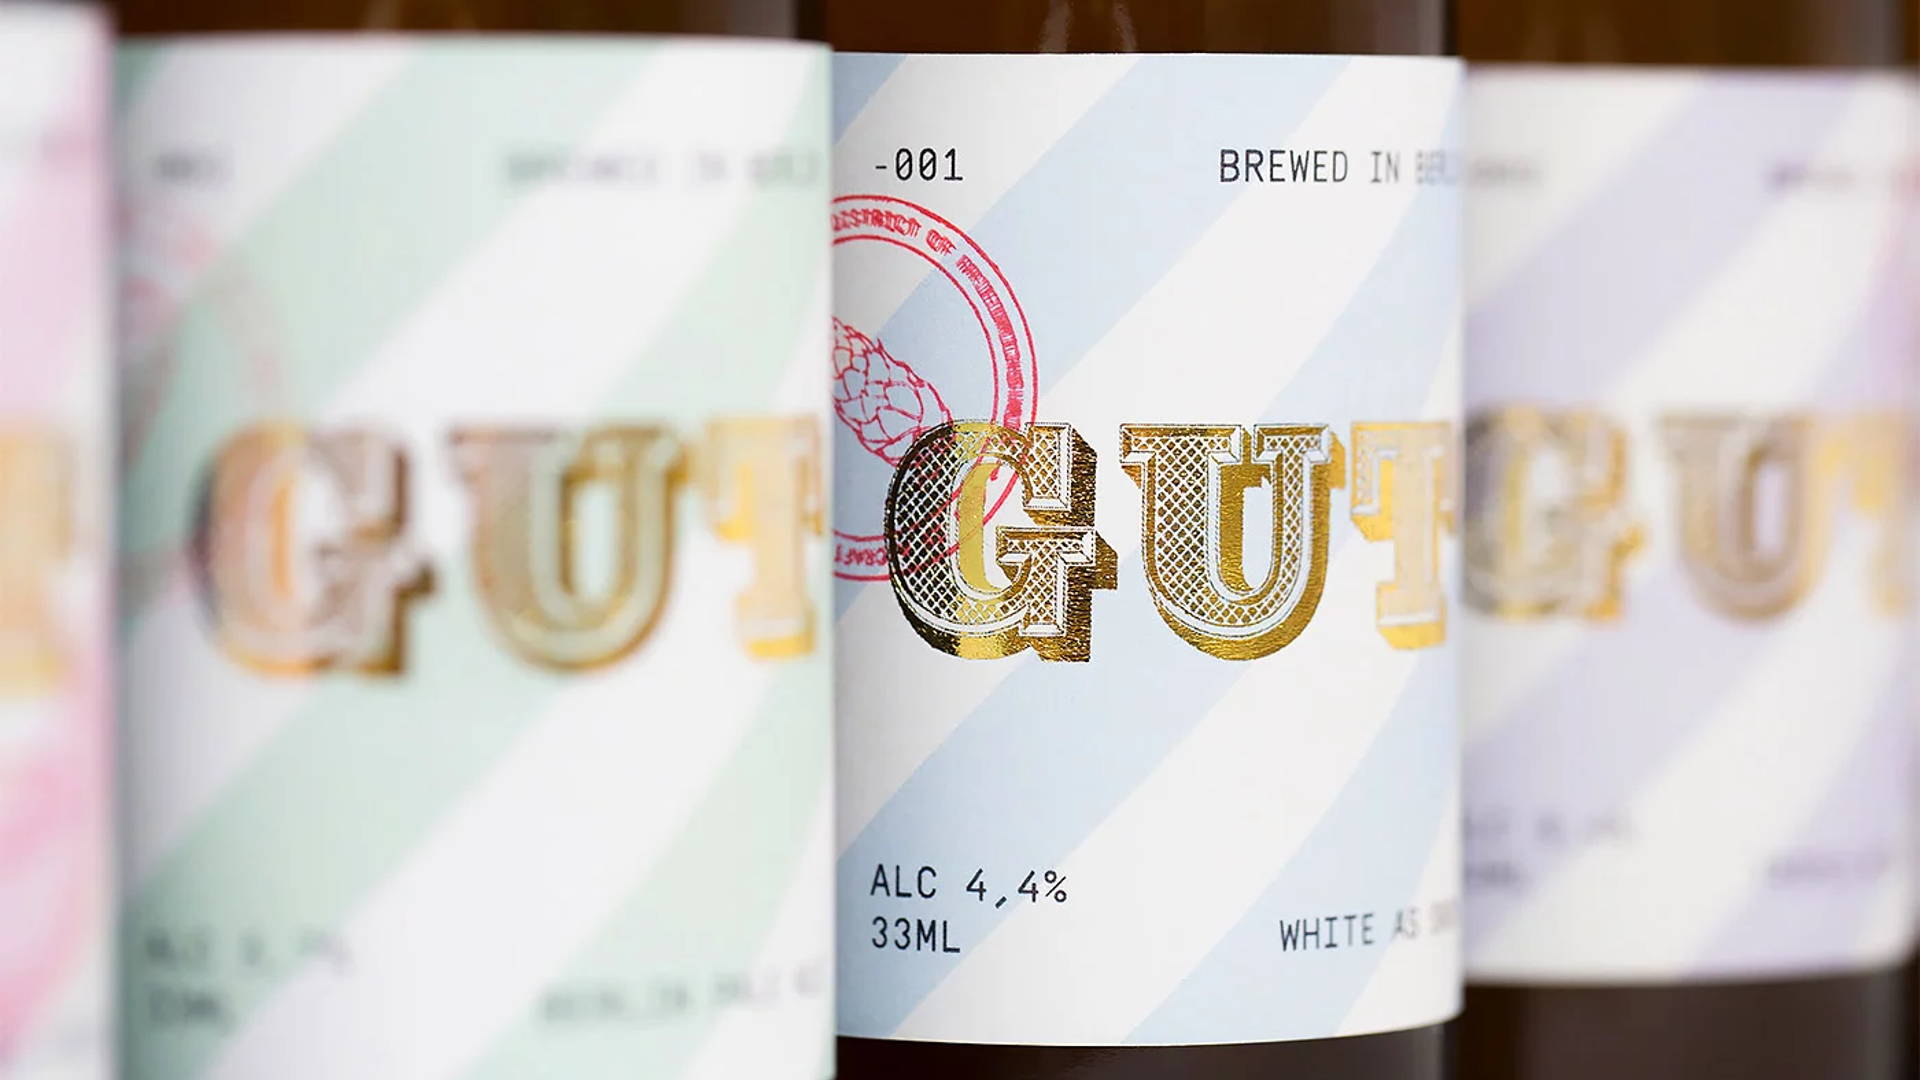 Featured image for "Gut Beer" Comes With an Soft Yet Elegant Look